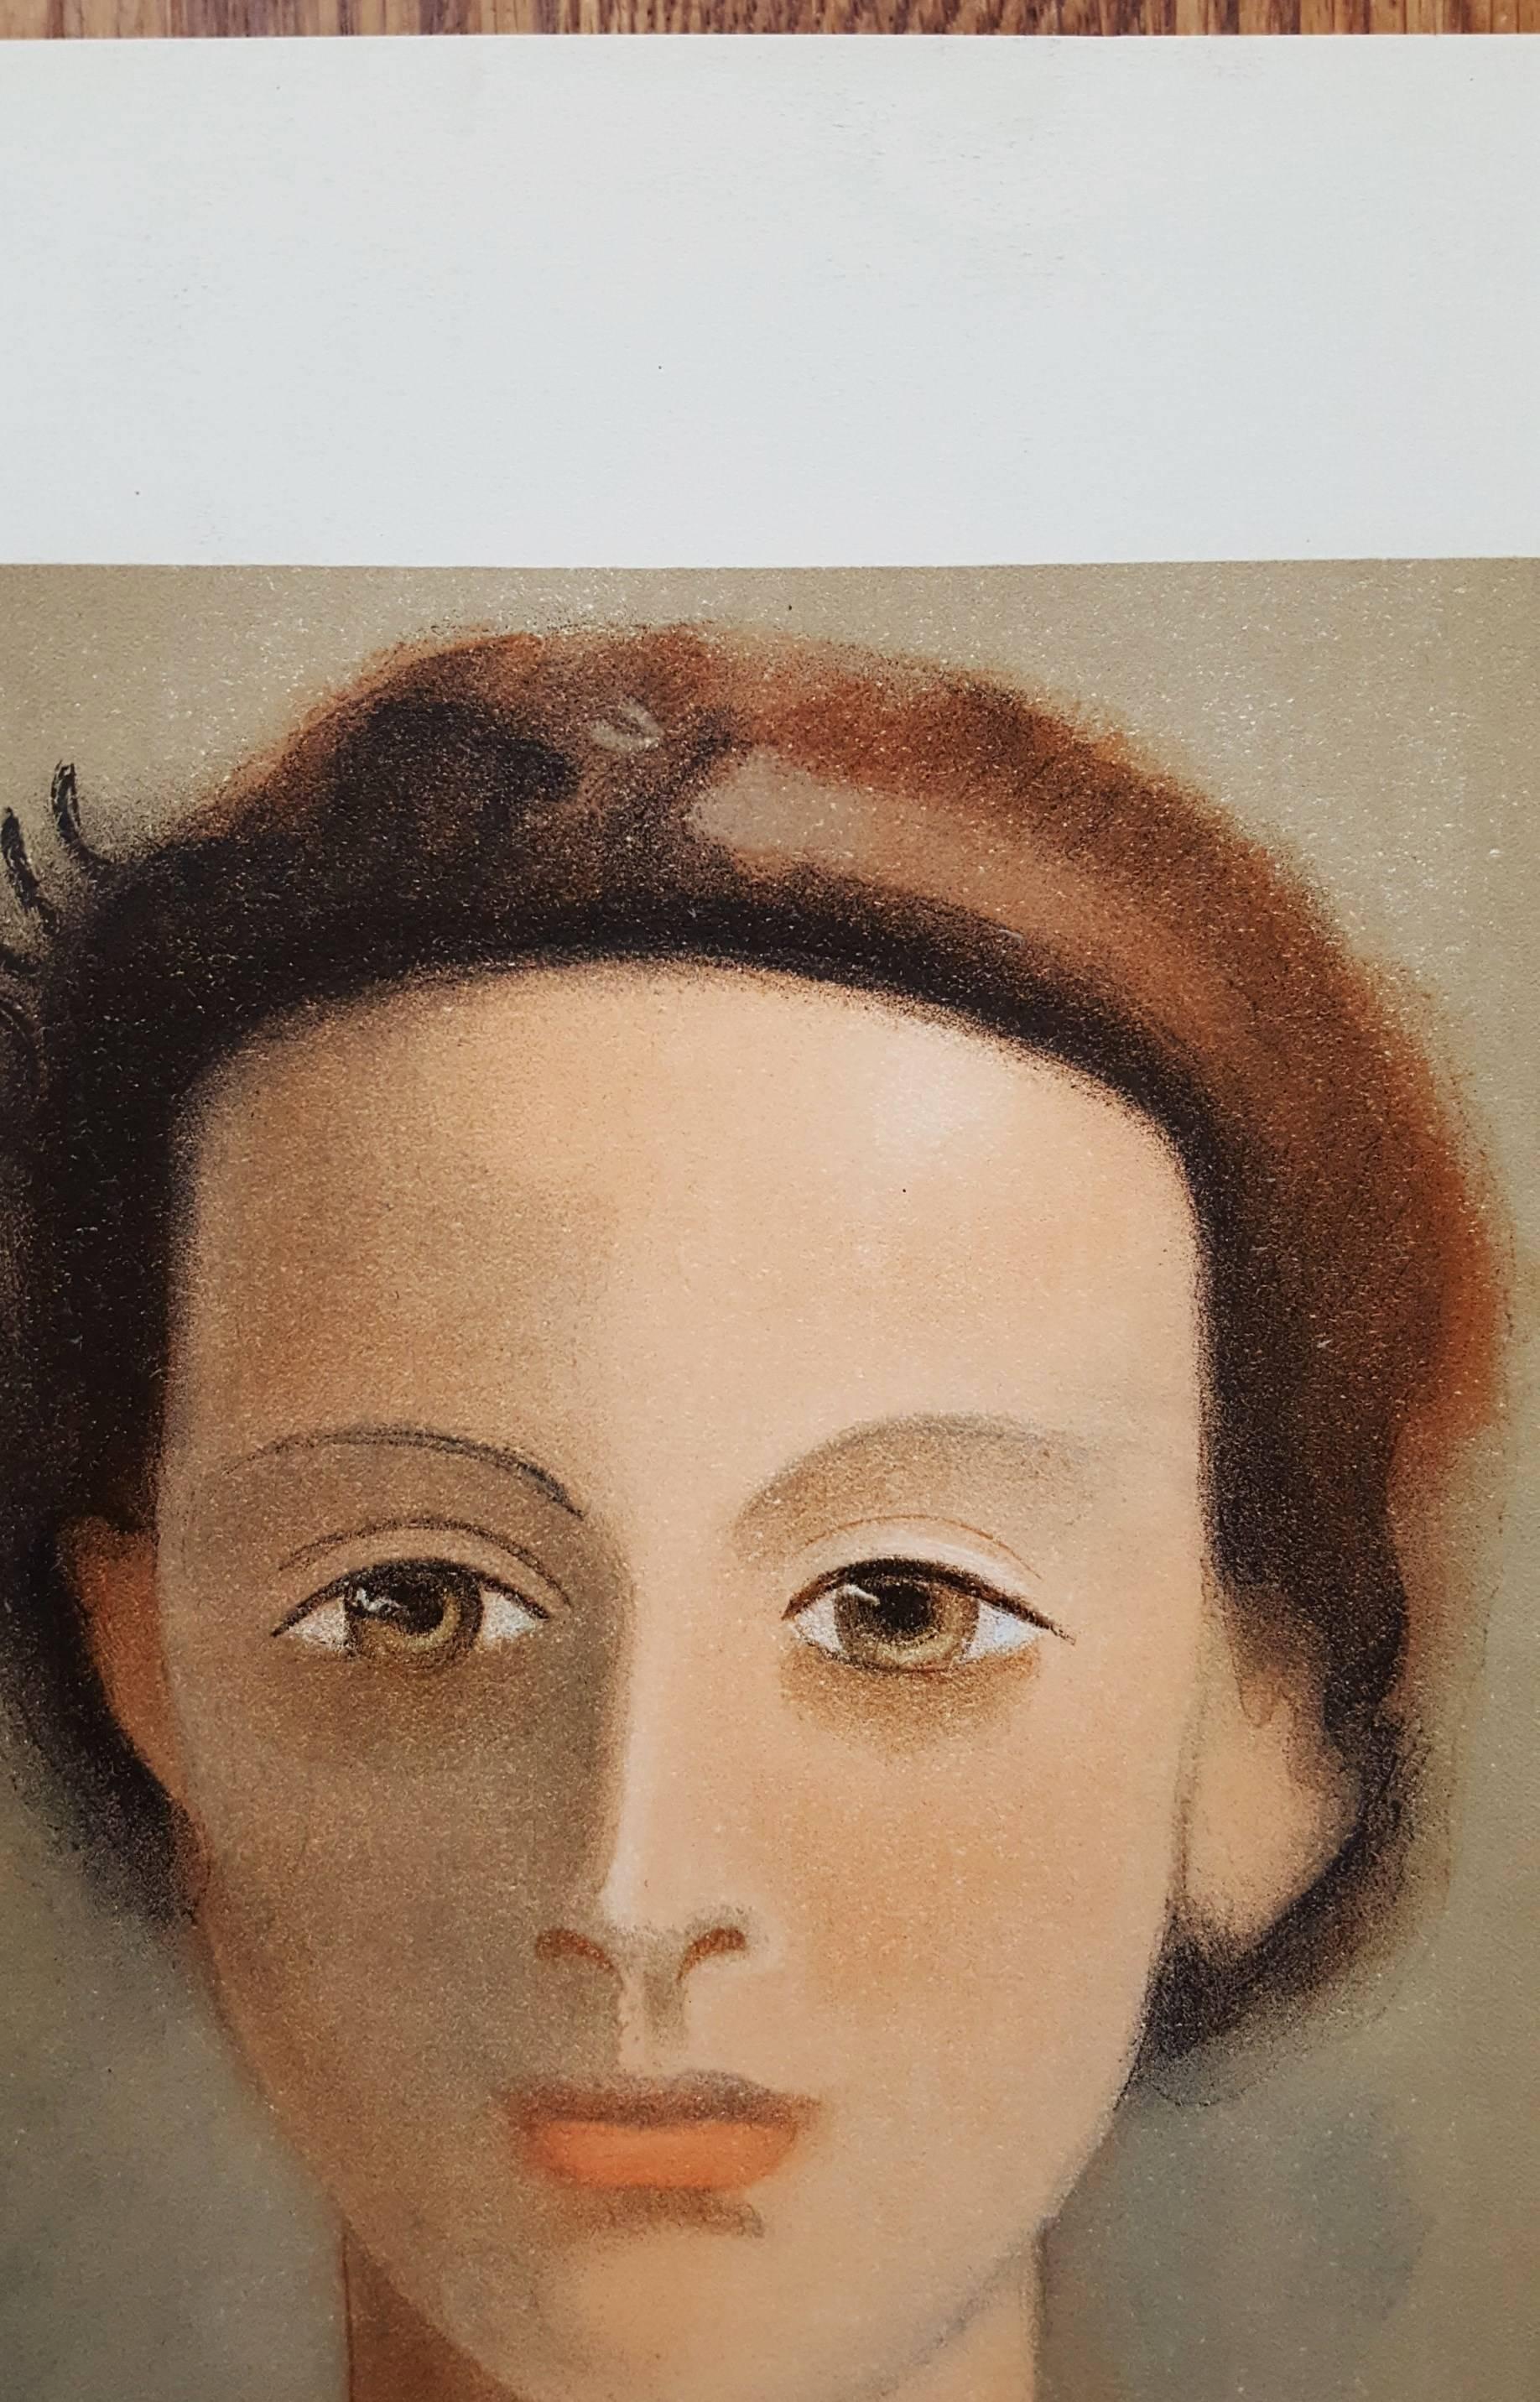 An original lithograph on wove by French artist André Derain (1880-1954) titled "Tete de Femme", 1939. Comes from the famous "Verve" portfolio, Volume 1. Produced in a limited edition of an unknown size, presumed approximately